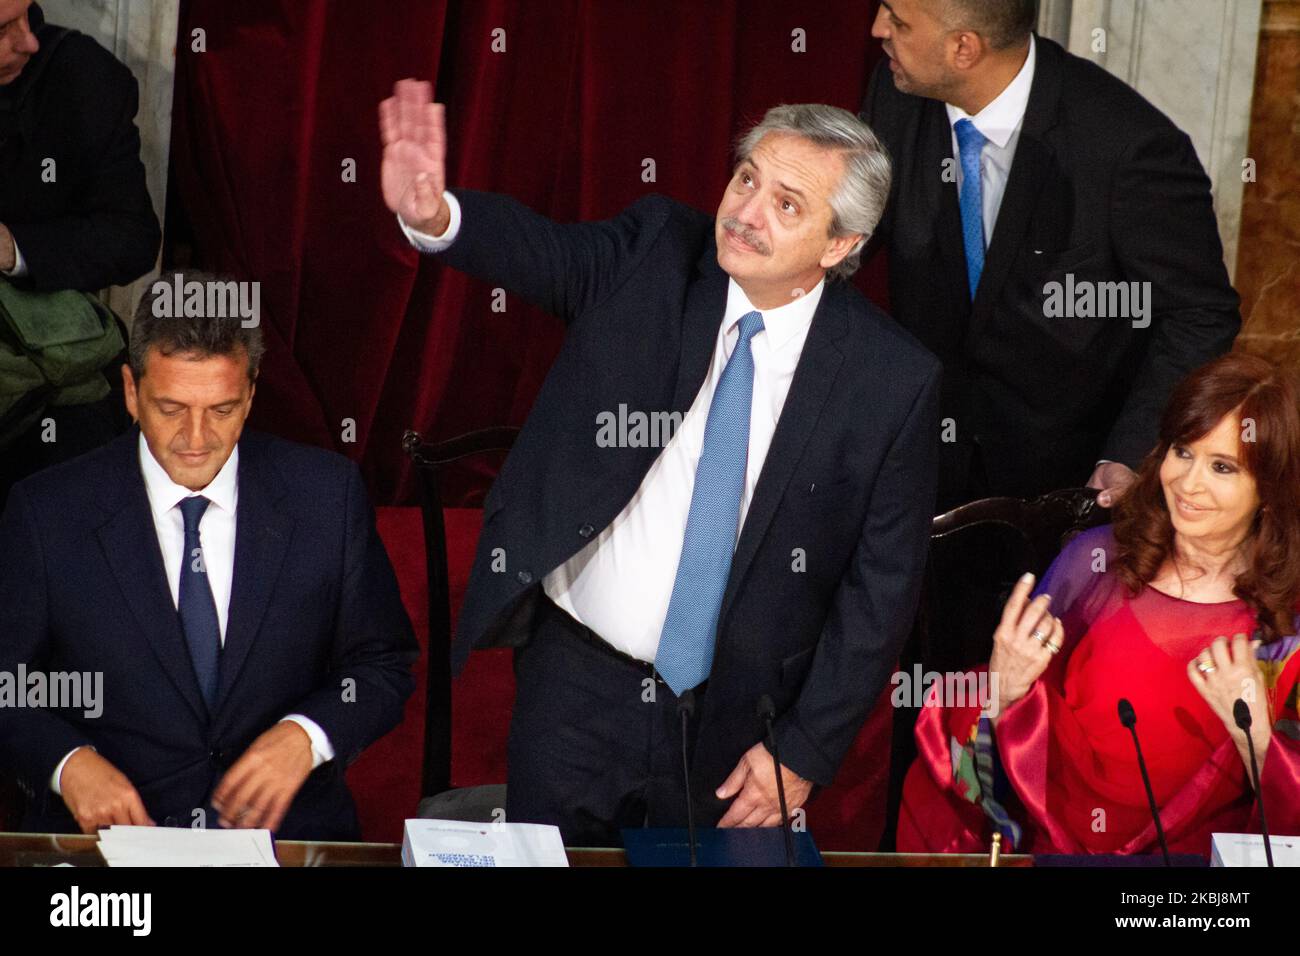 Sergio Massa, Alberto Fernández, Cristina Fernández de Kirchner, during the opening session of the 138th period of the Argentine Congress on March 01, 2020 in Buenos Aires, Argentina. (Photo by Federico Rotter/NurPhoto) Stock Photo